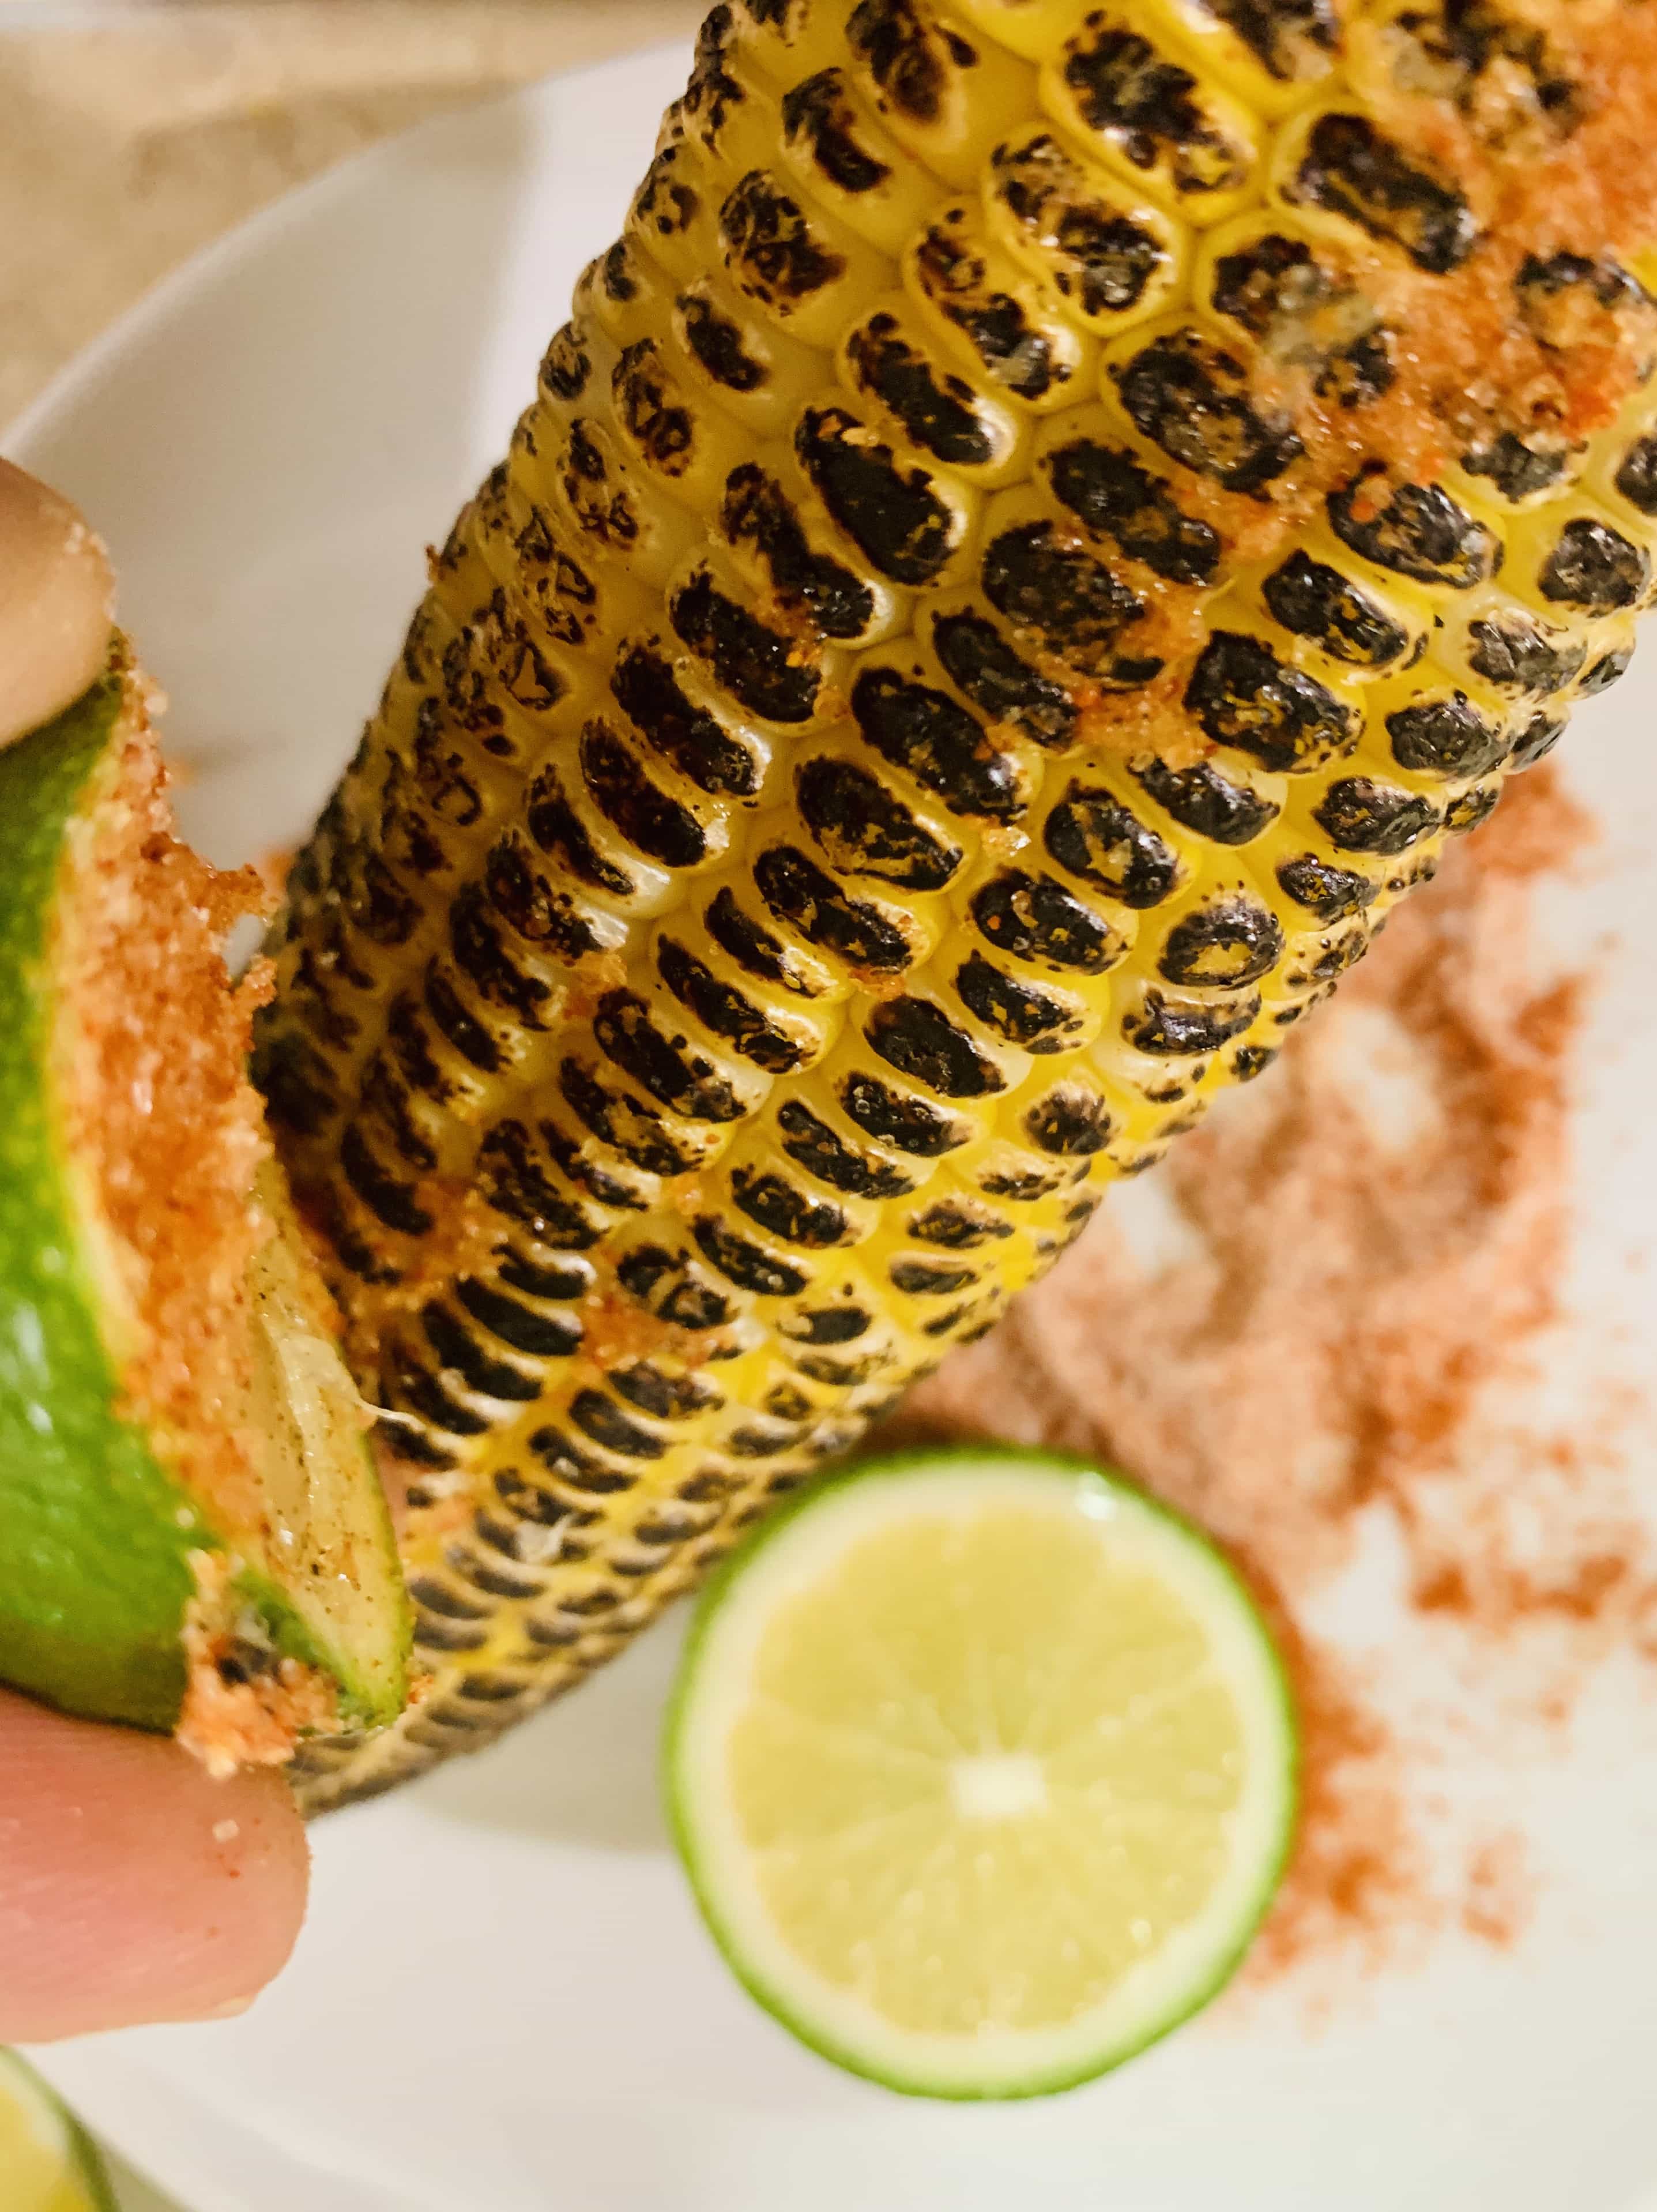 Grilled Corn or bhutta or kanis